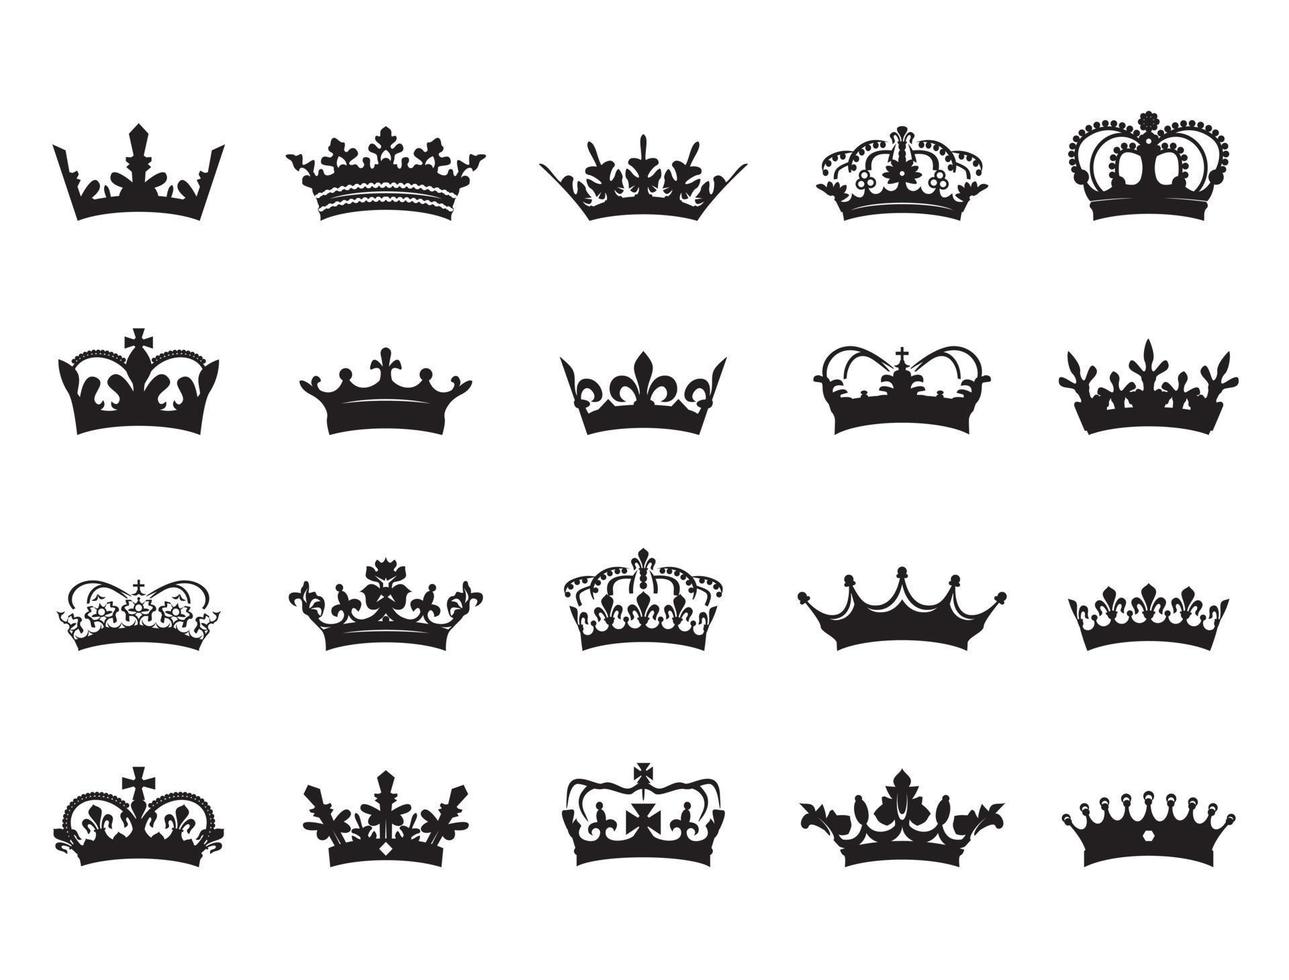 HERALDIC CROWN COLLECTION. Big set of icons. Vector graphic.